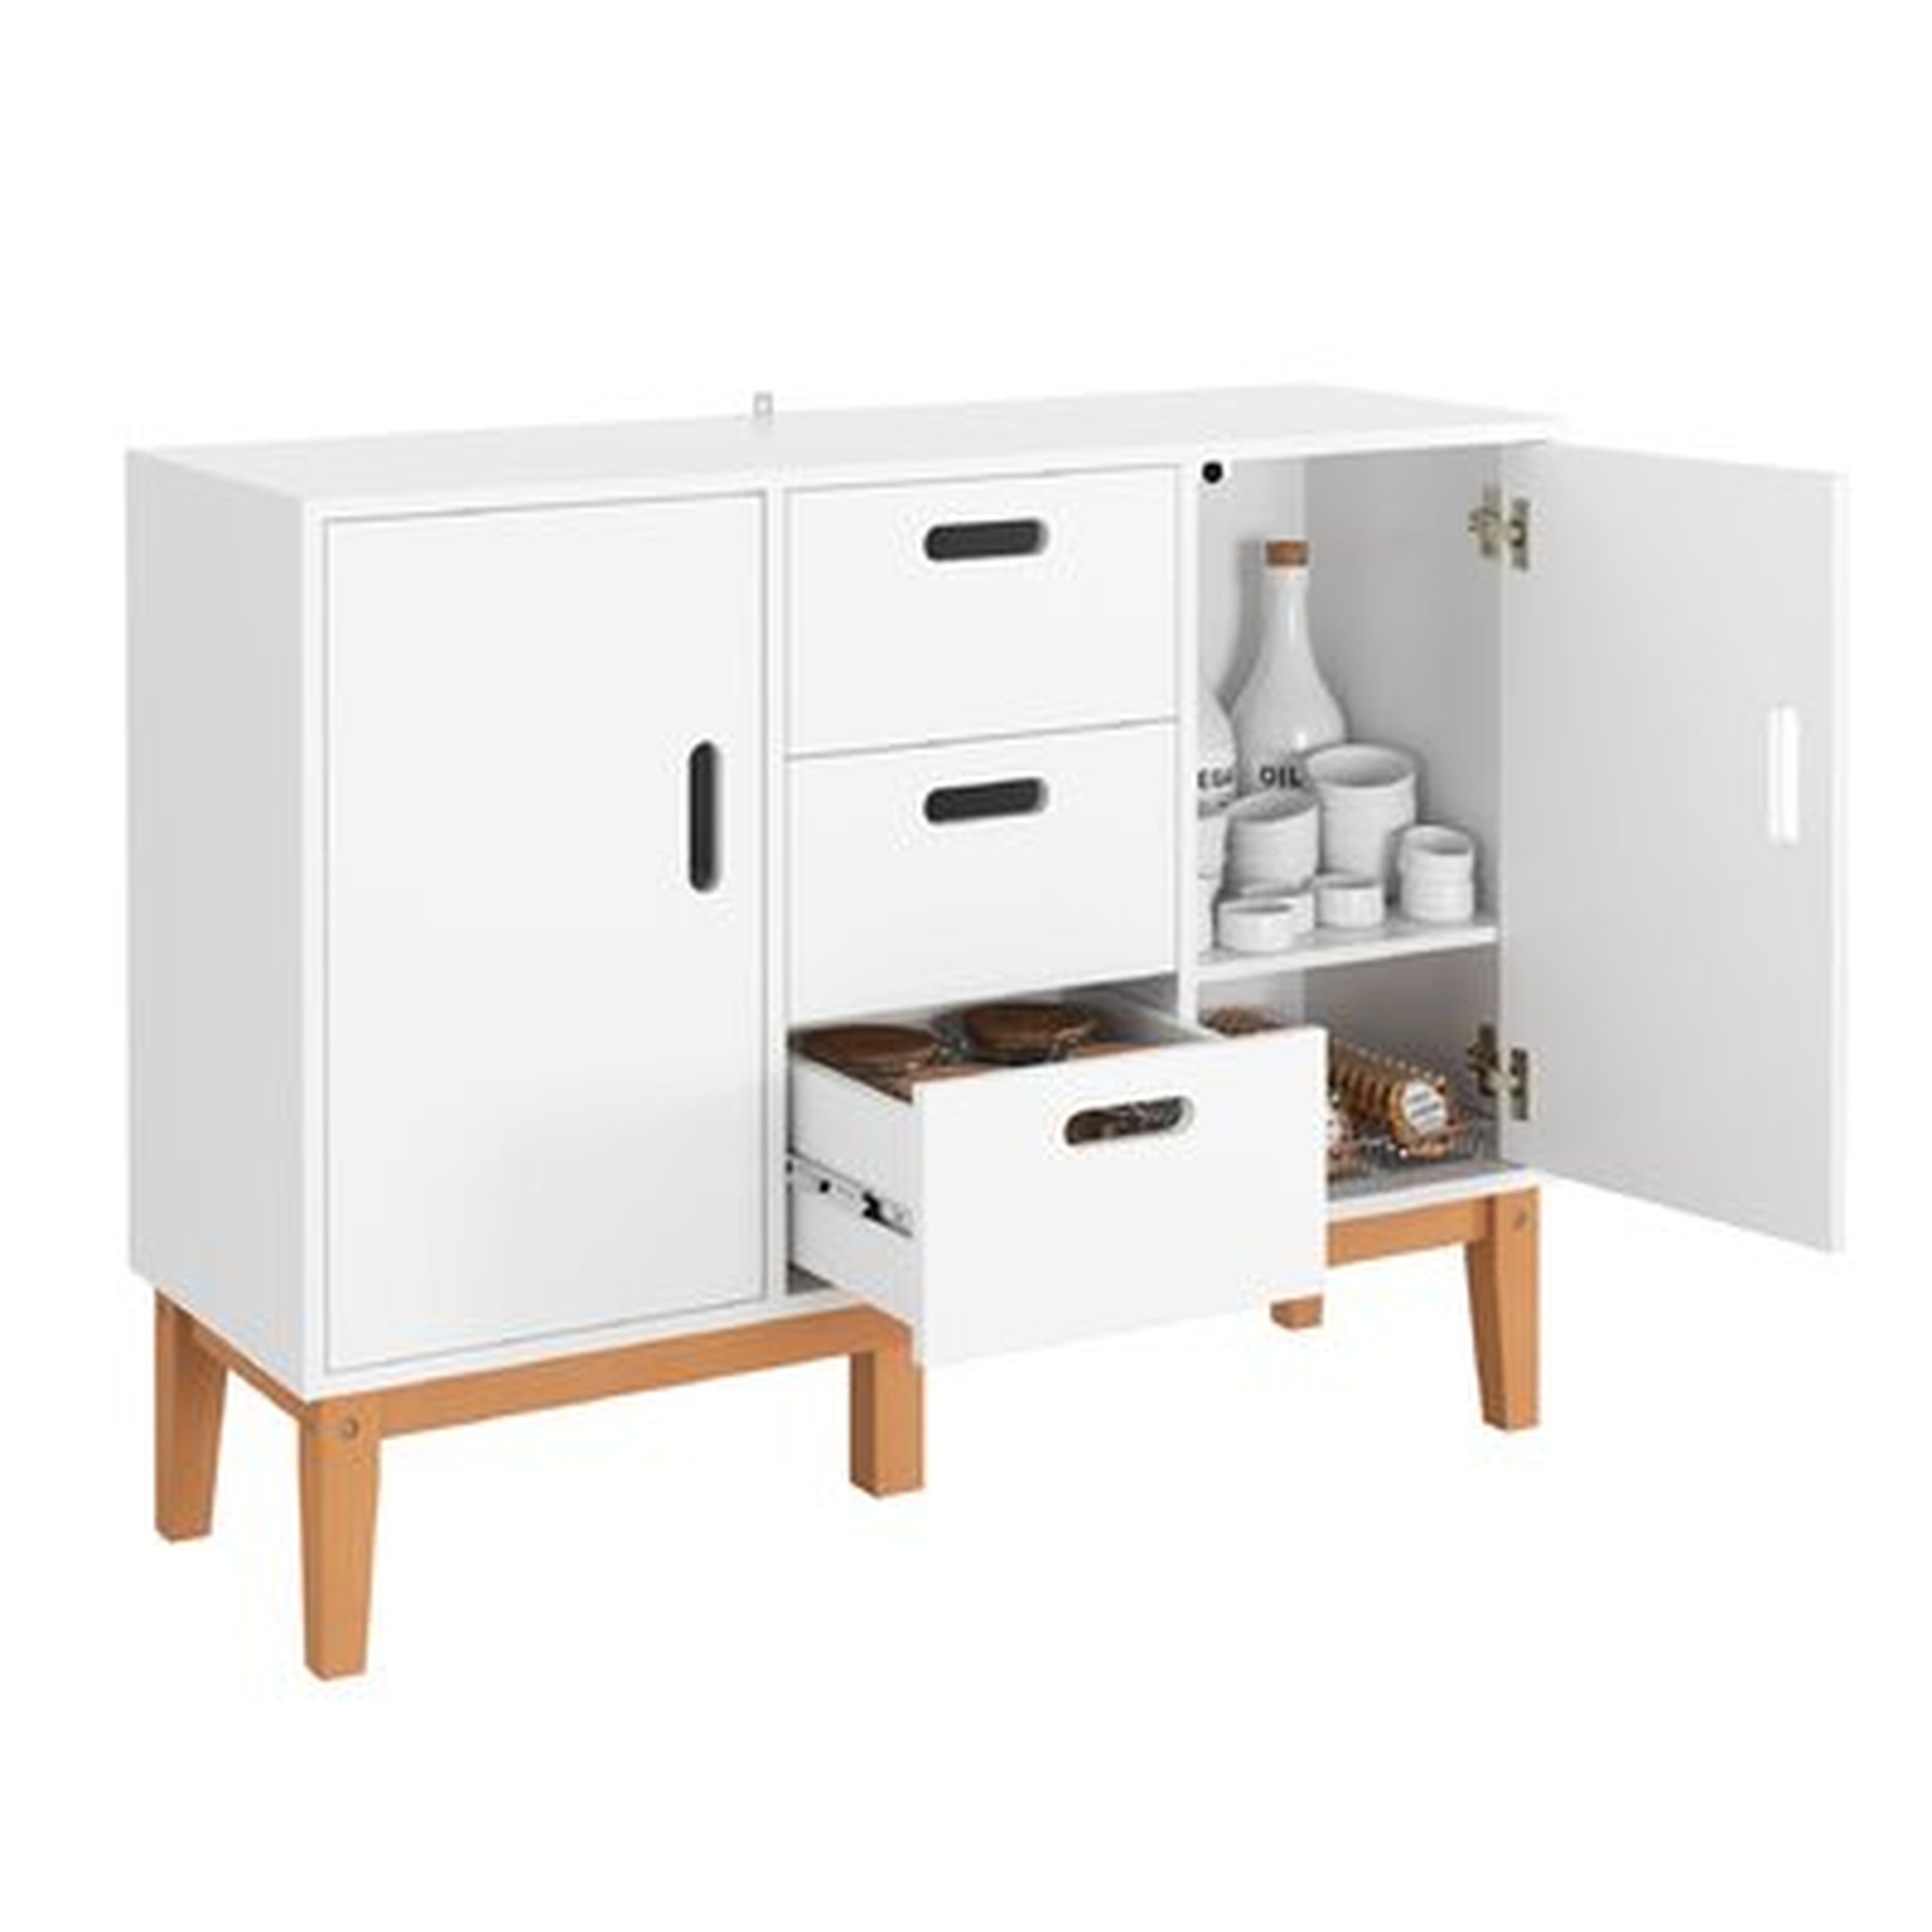 Sideboard Storage Cabinet, Wood Accent Cupboard Table, Kitchen Buffet With 2 Doors And 3 Drawers, Adjustable Shelf, Tv Console Stand For Home Office, Ivory White - Wayfair